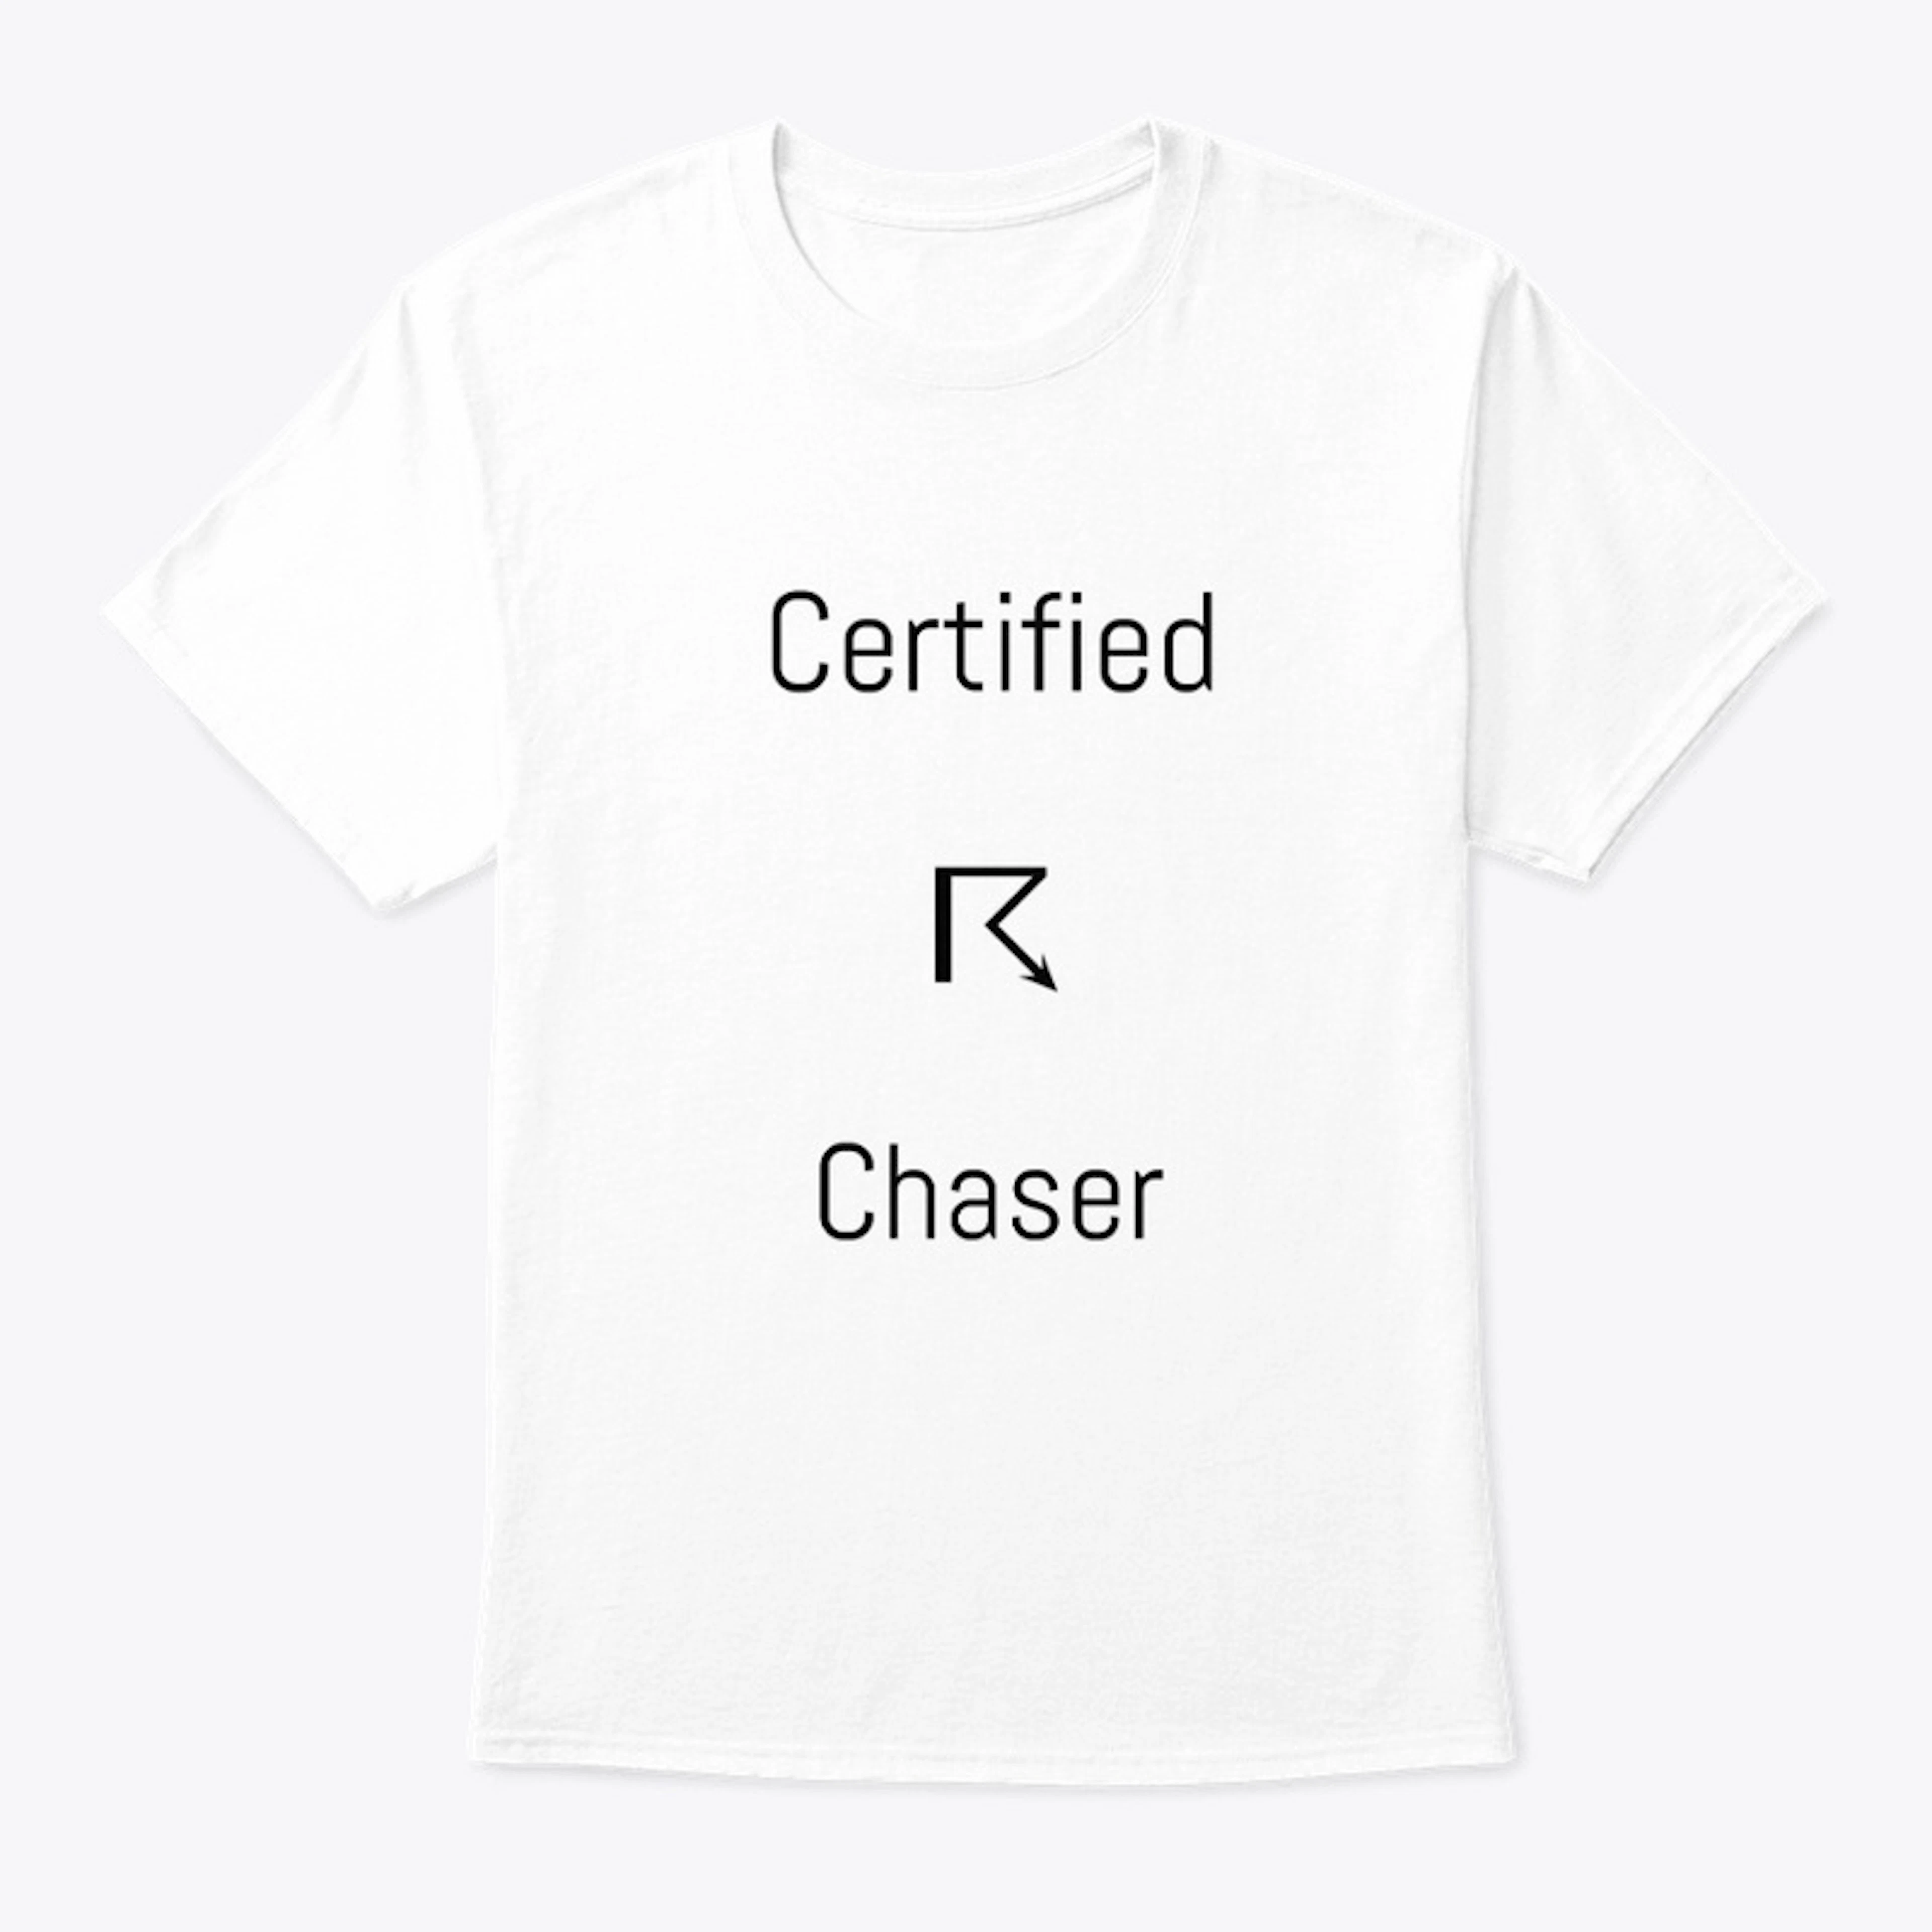 Certified Storm Chaser T-Shirt